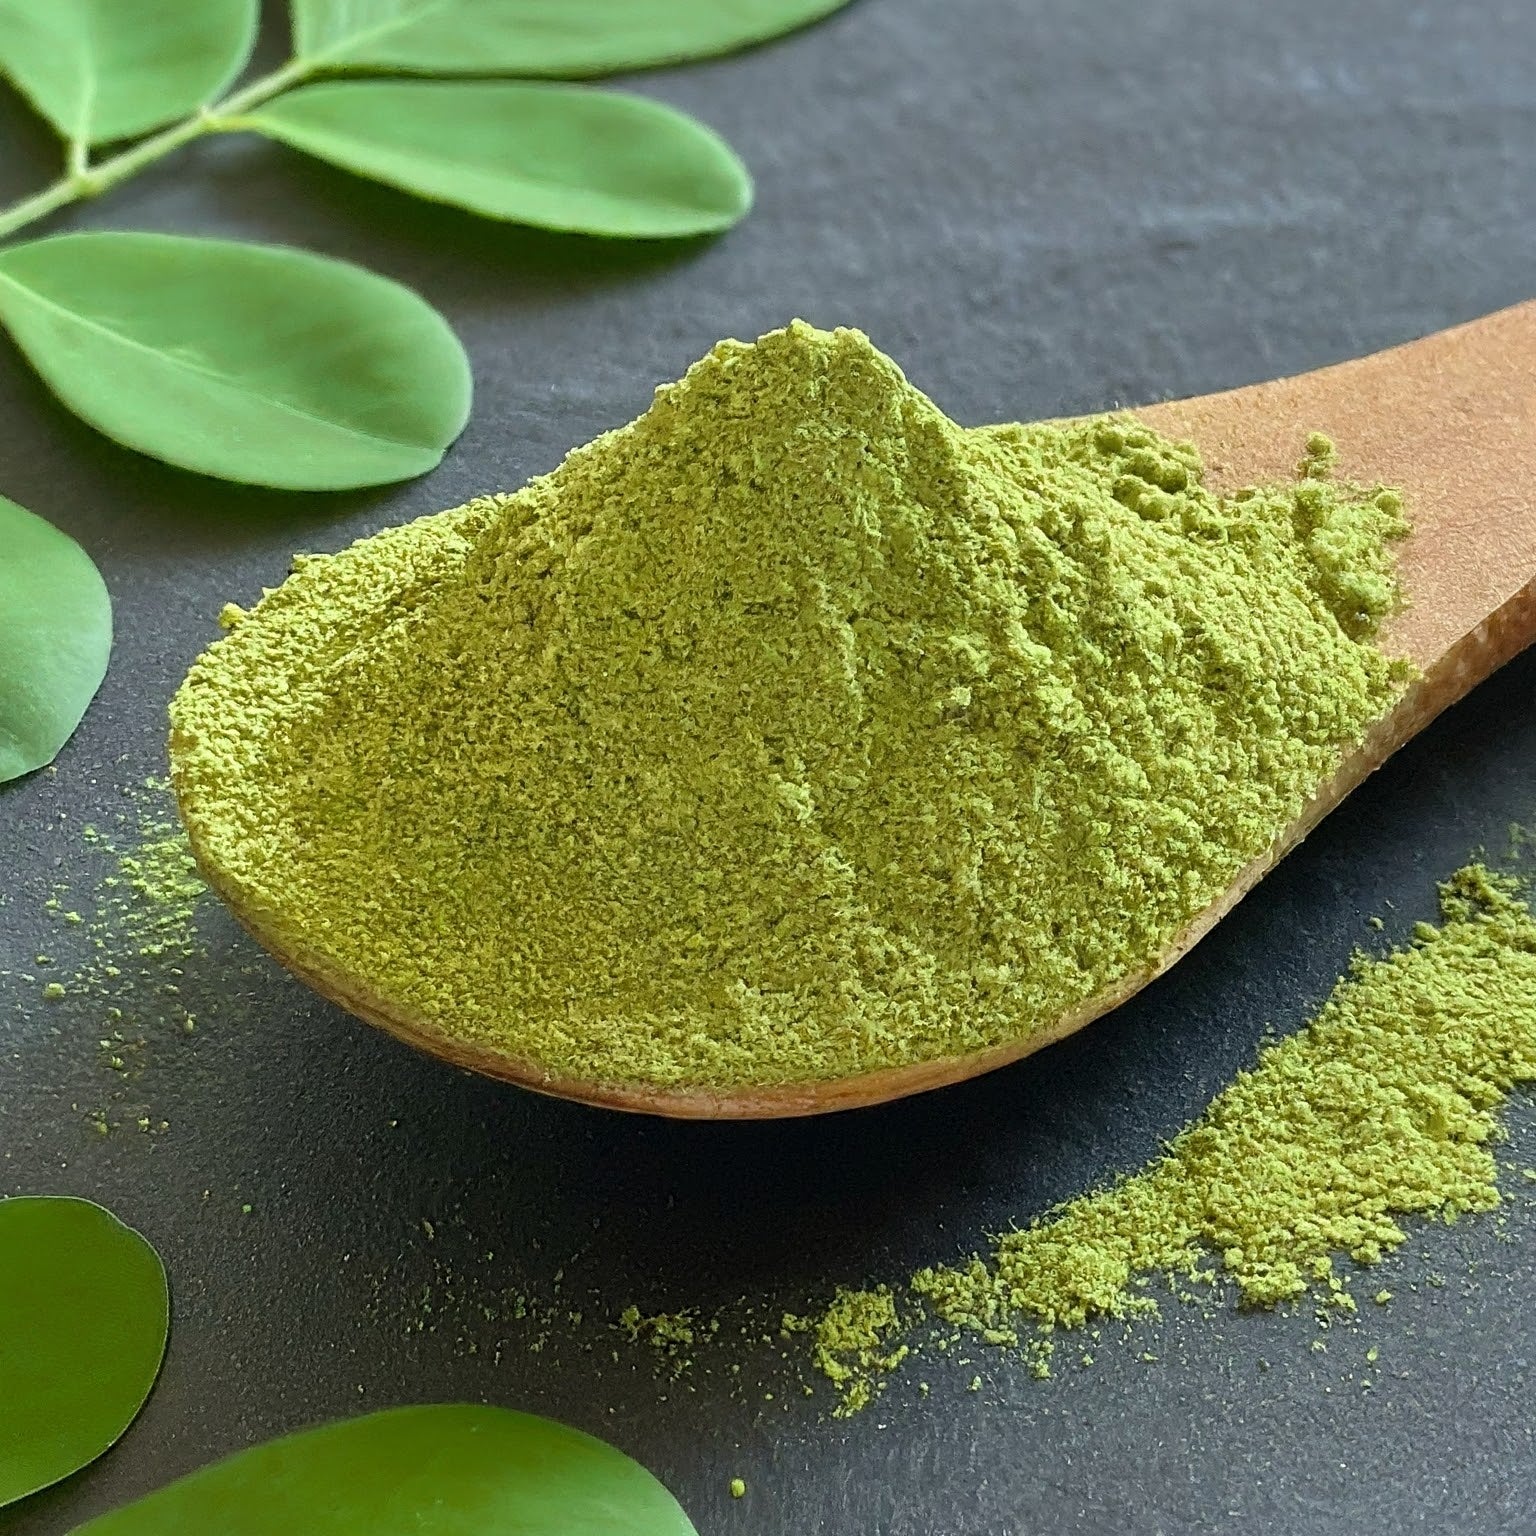 Moringa: Nature's Nutrient-Dense Superfood - Benefits and Uses